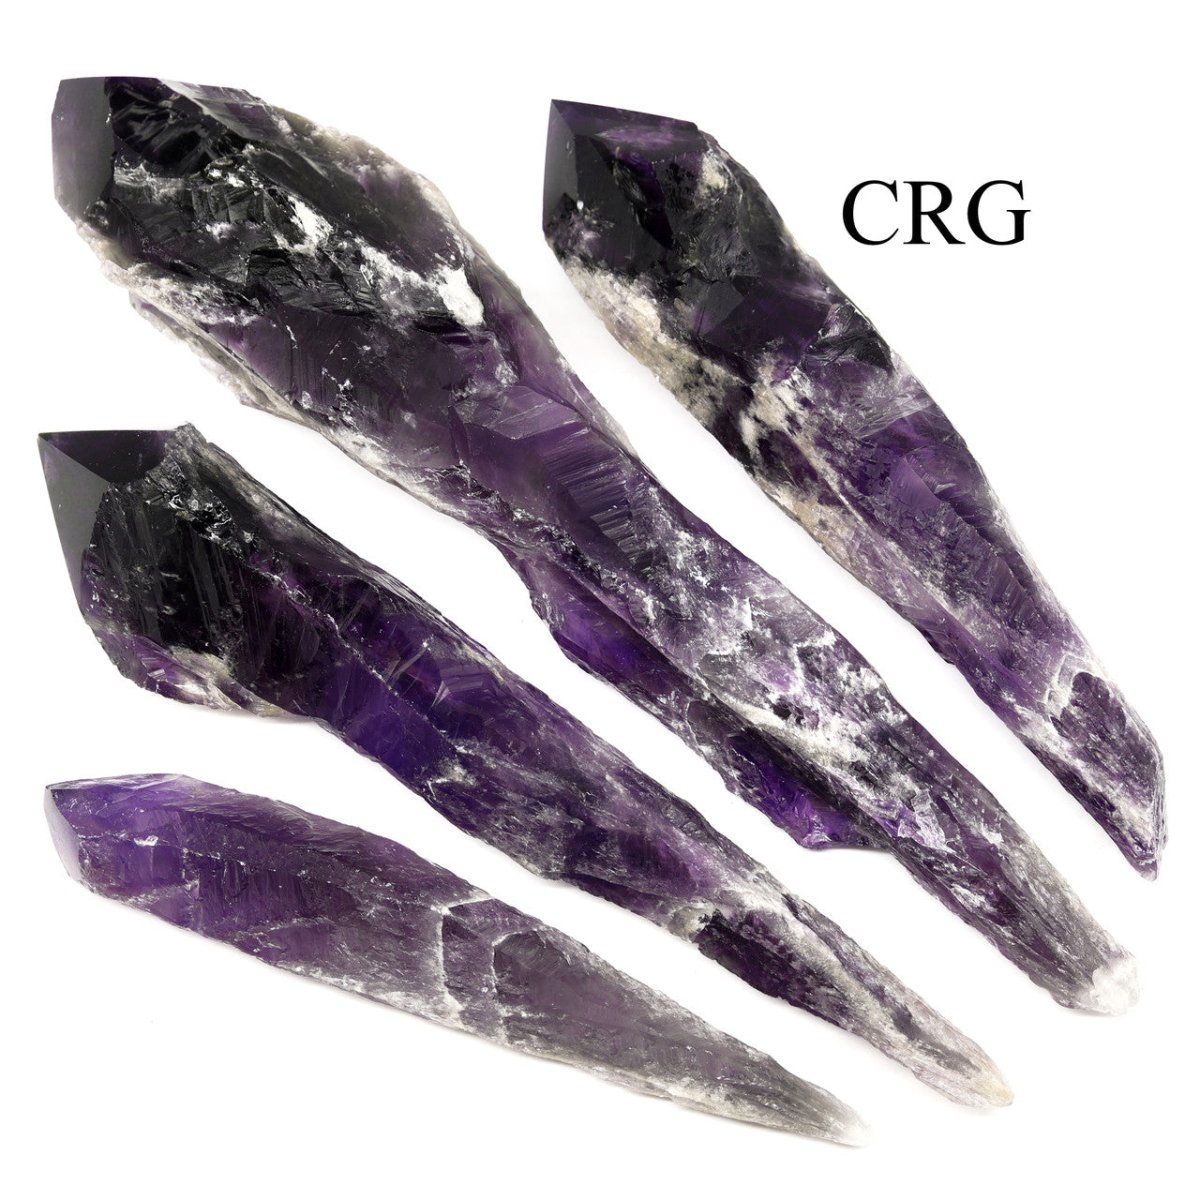 Raw Crystals & Clusters - Crystal River Gems